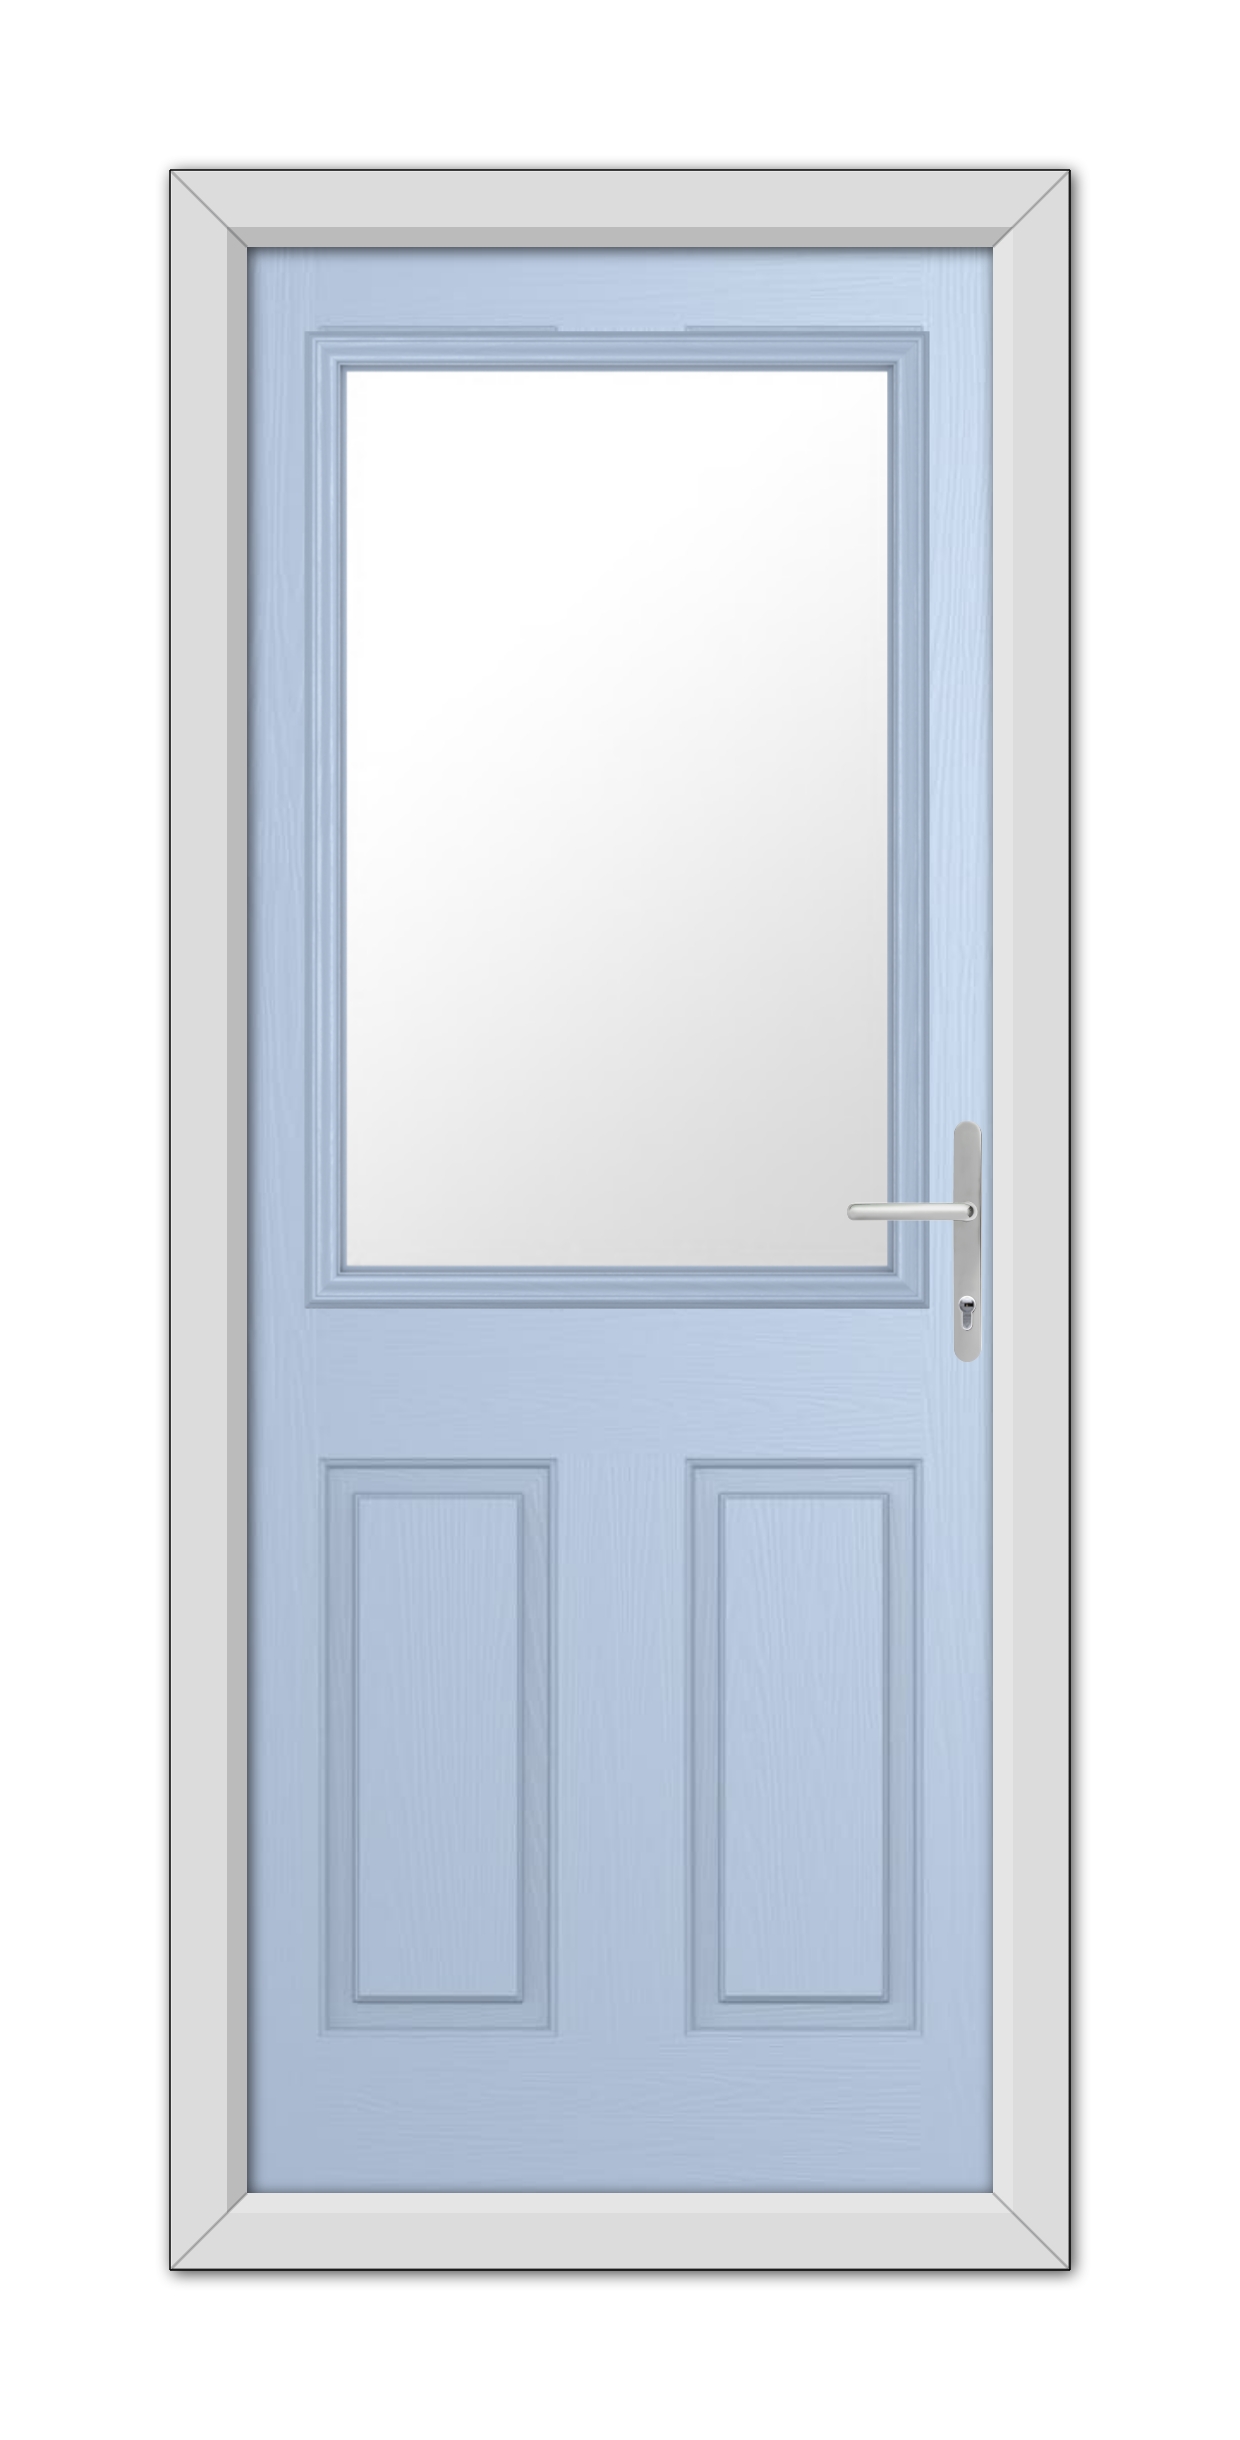 A Duck Egg Blue Buxton Composite Door 48mm Timber Core with a rectangular frosted glass panel and a silver handle, set within a white door frame.